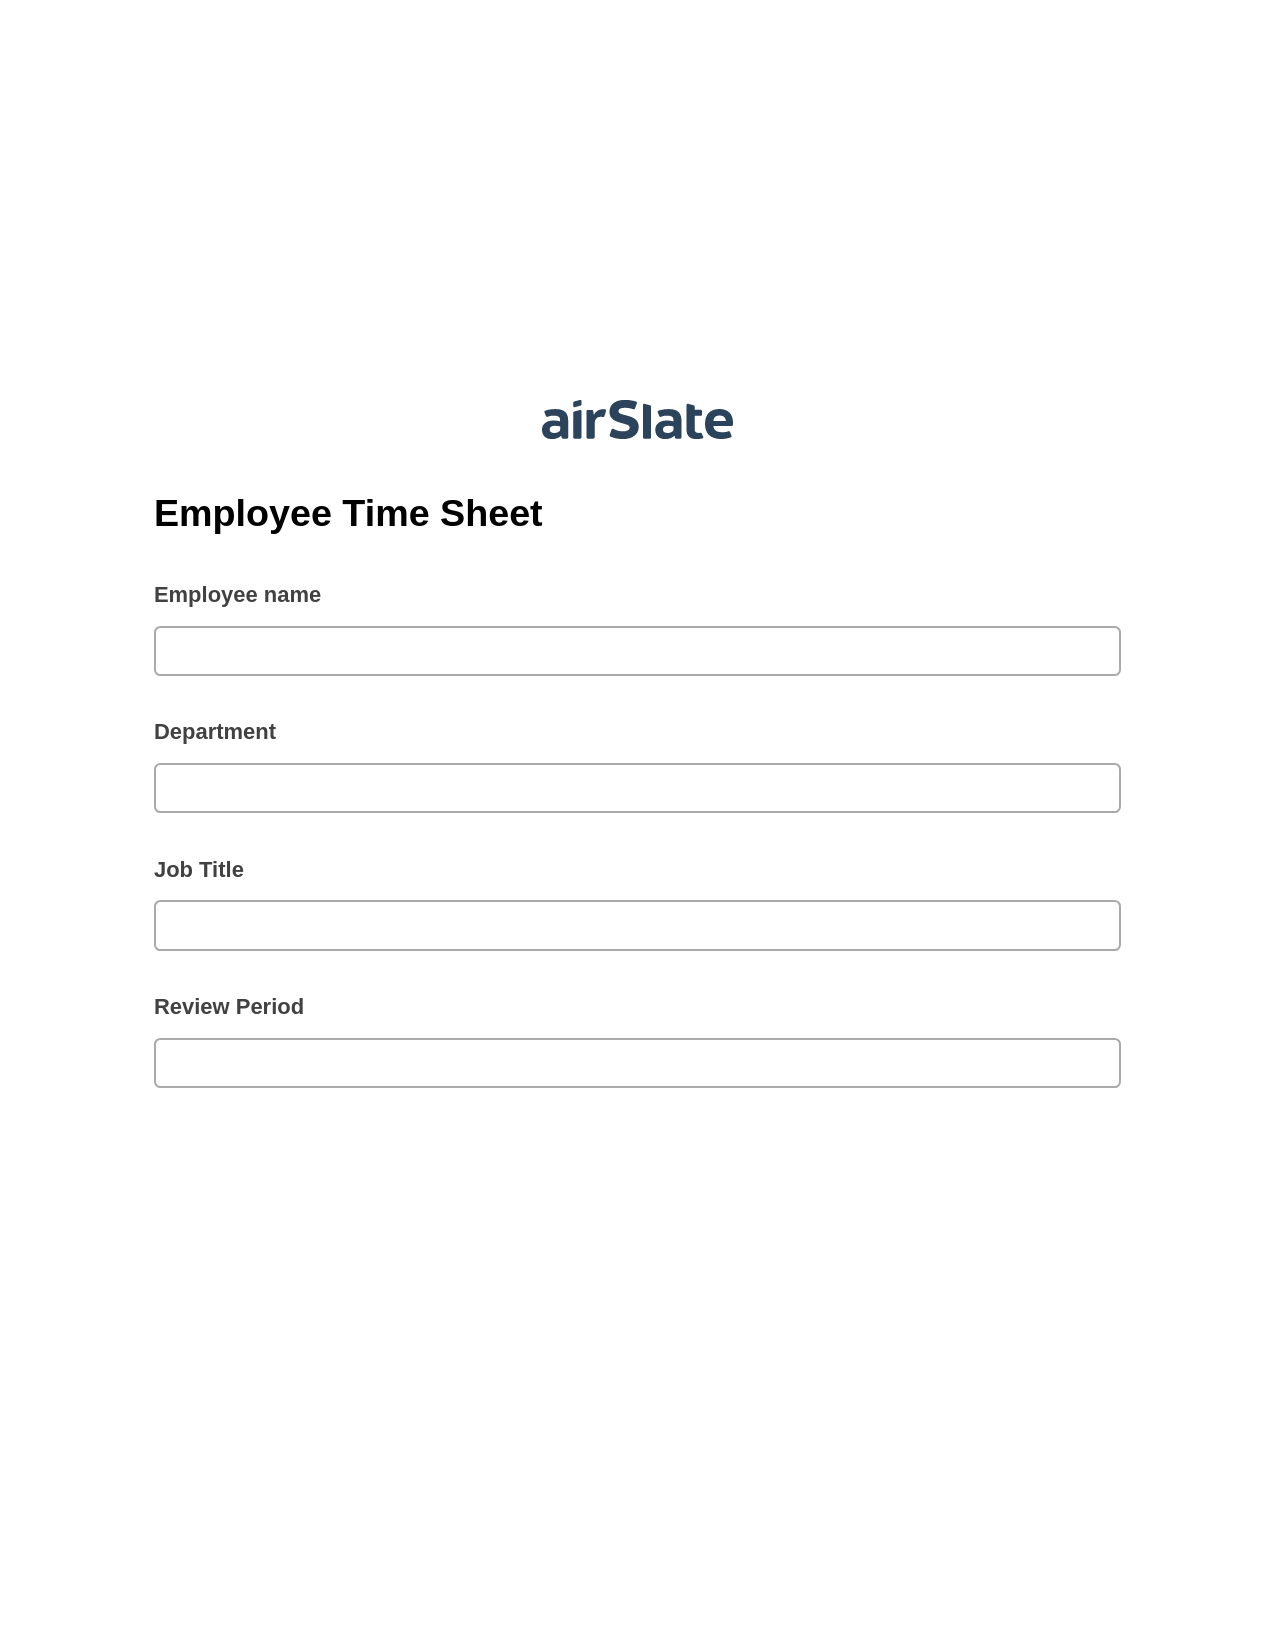 Multirole Employee Time Sheet Pre-fill from another Slate Bot, Create slate addon, Archive to Google Drive Bot